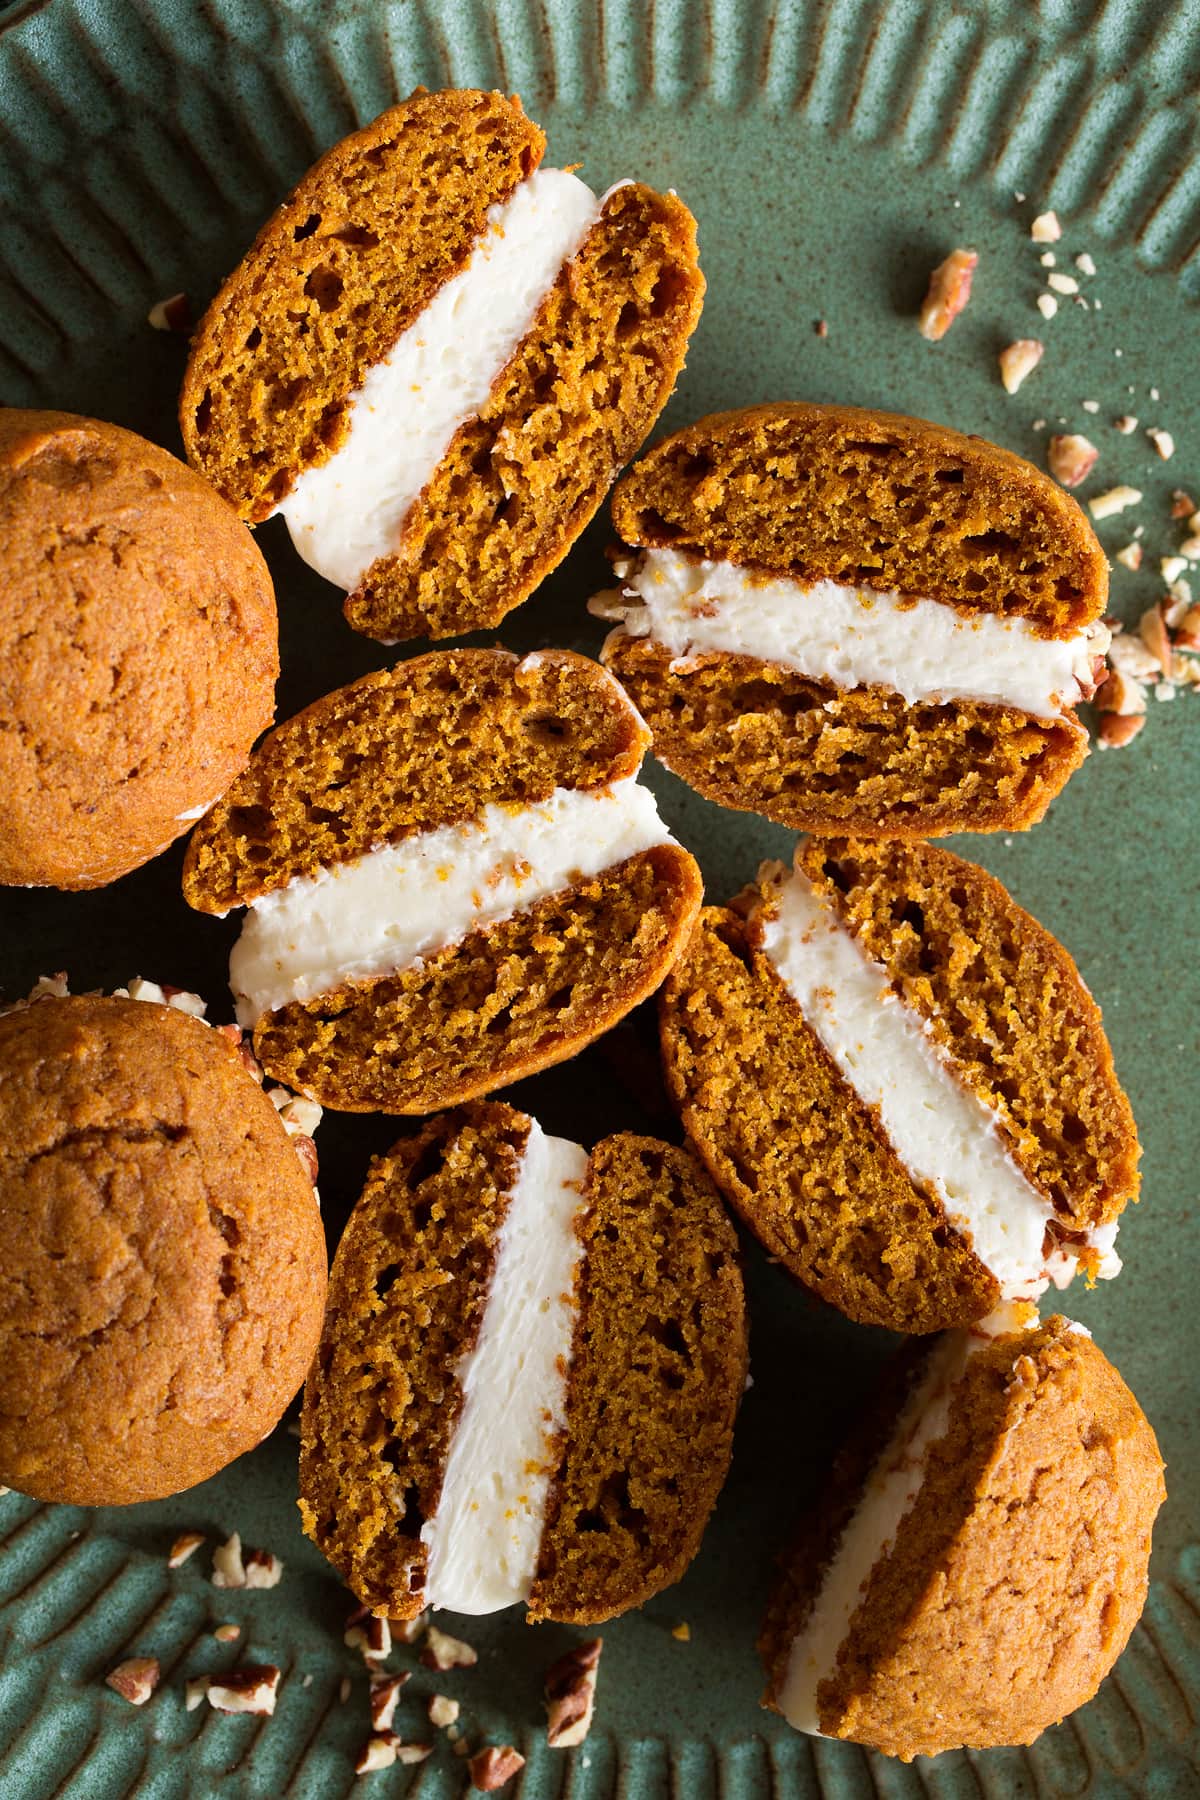 Pumpkin whoopie pies cut in half to show texture and frosting filling.